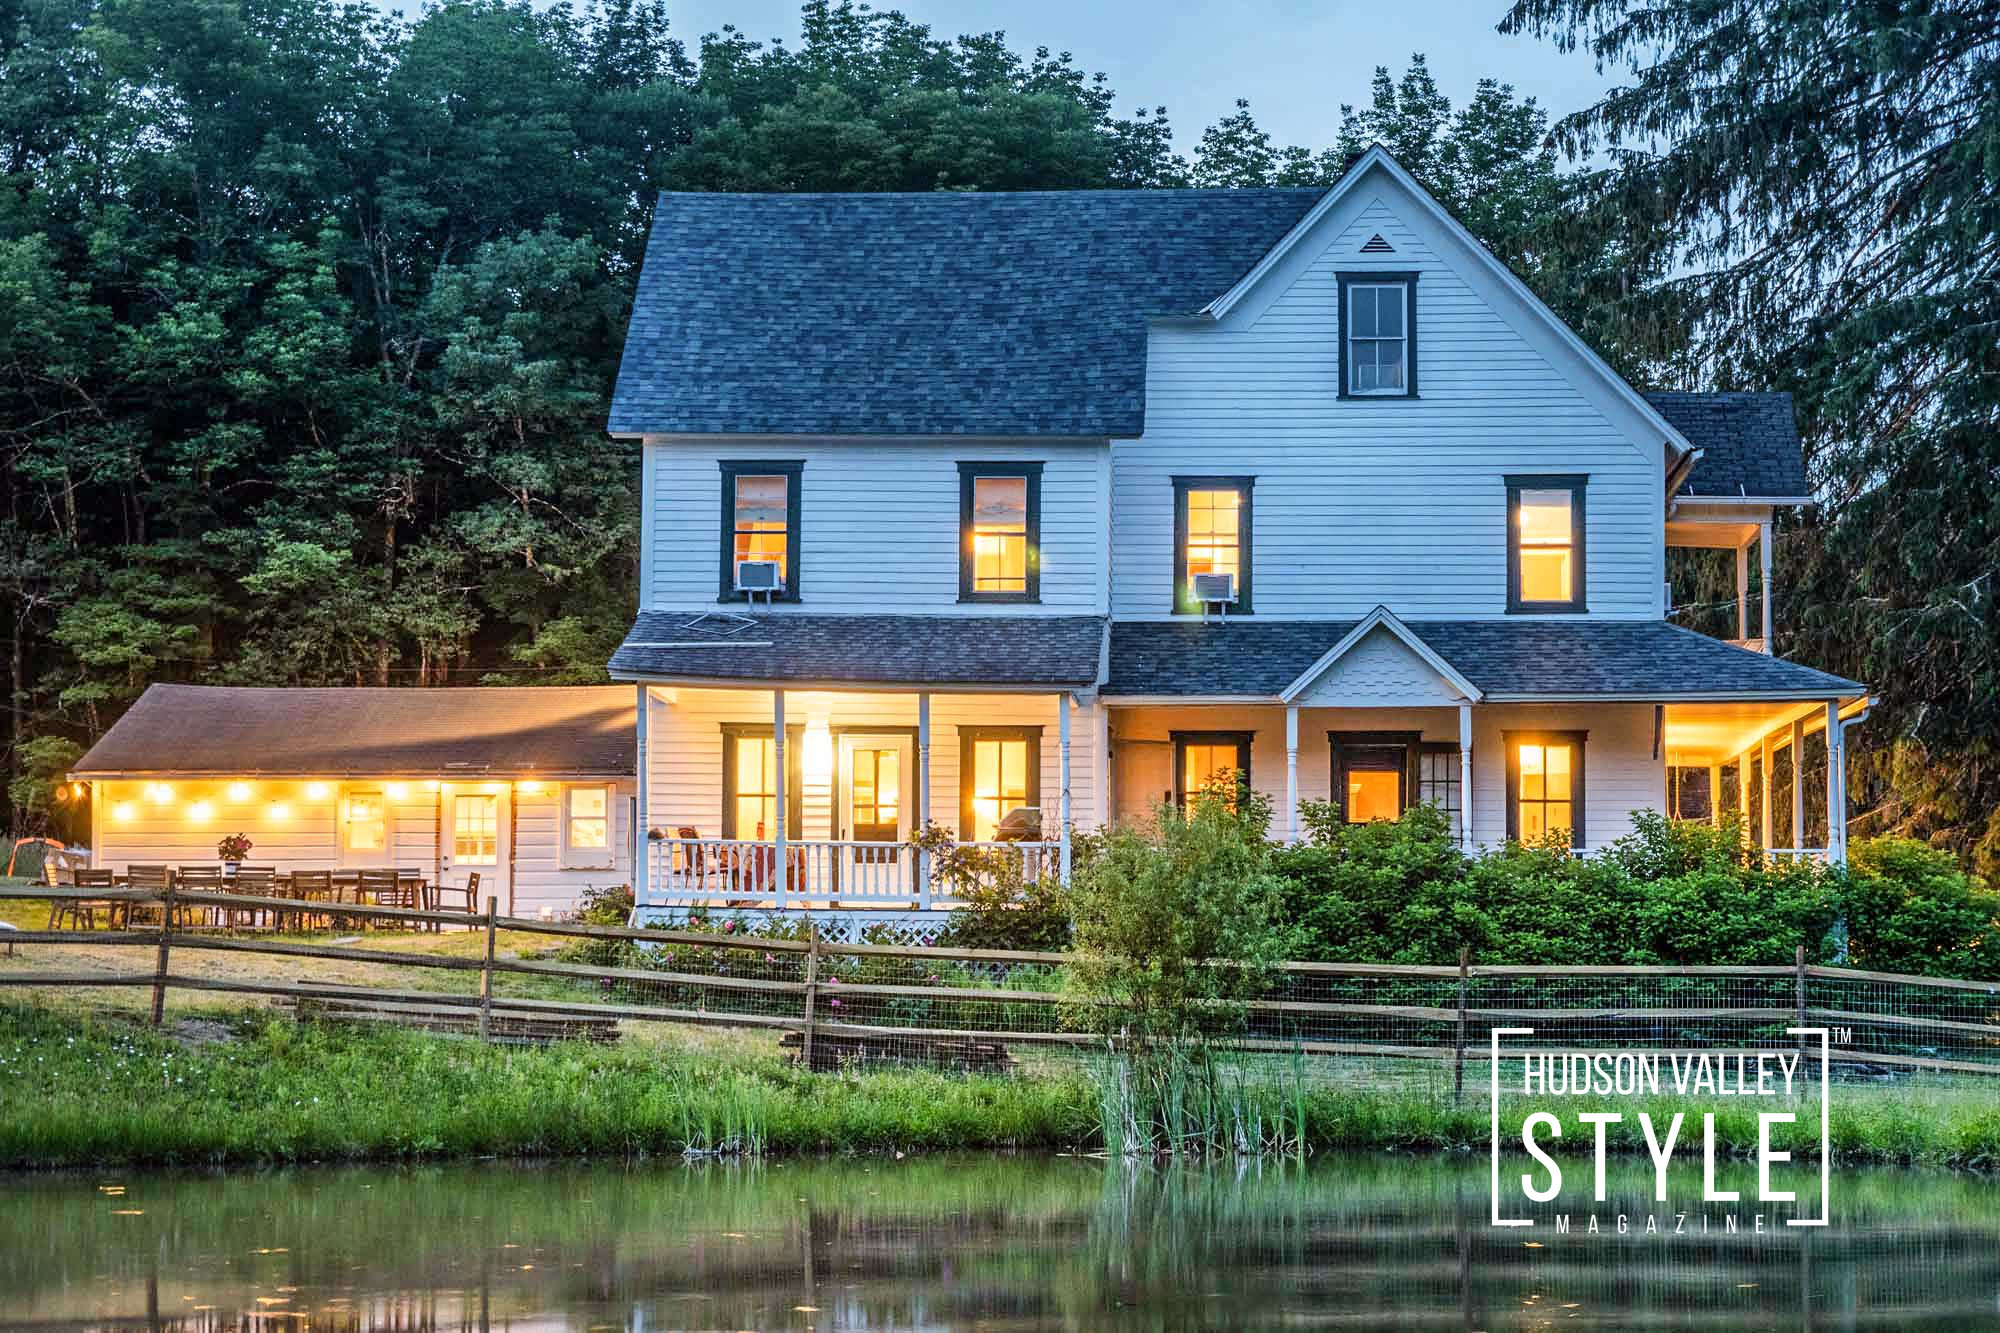 Upstate New York: A Guide to Finding Your Modern Rustic Farmhouse – Presented by Alluvion Real Estate – Best Realtors in Hudson Valley and Catskills